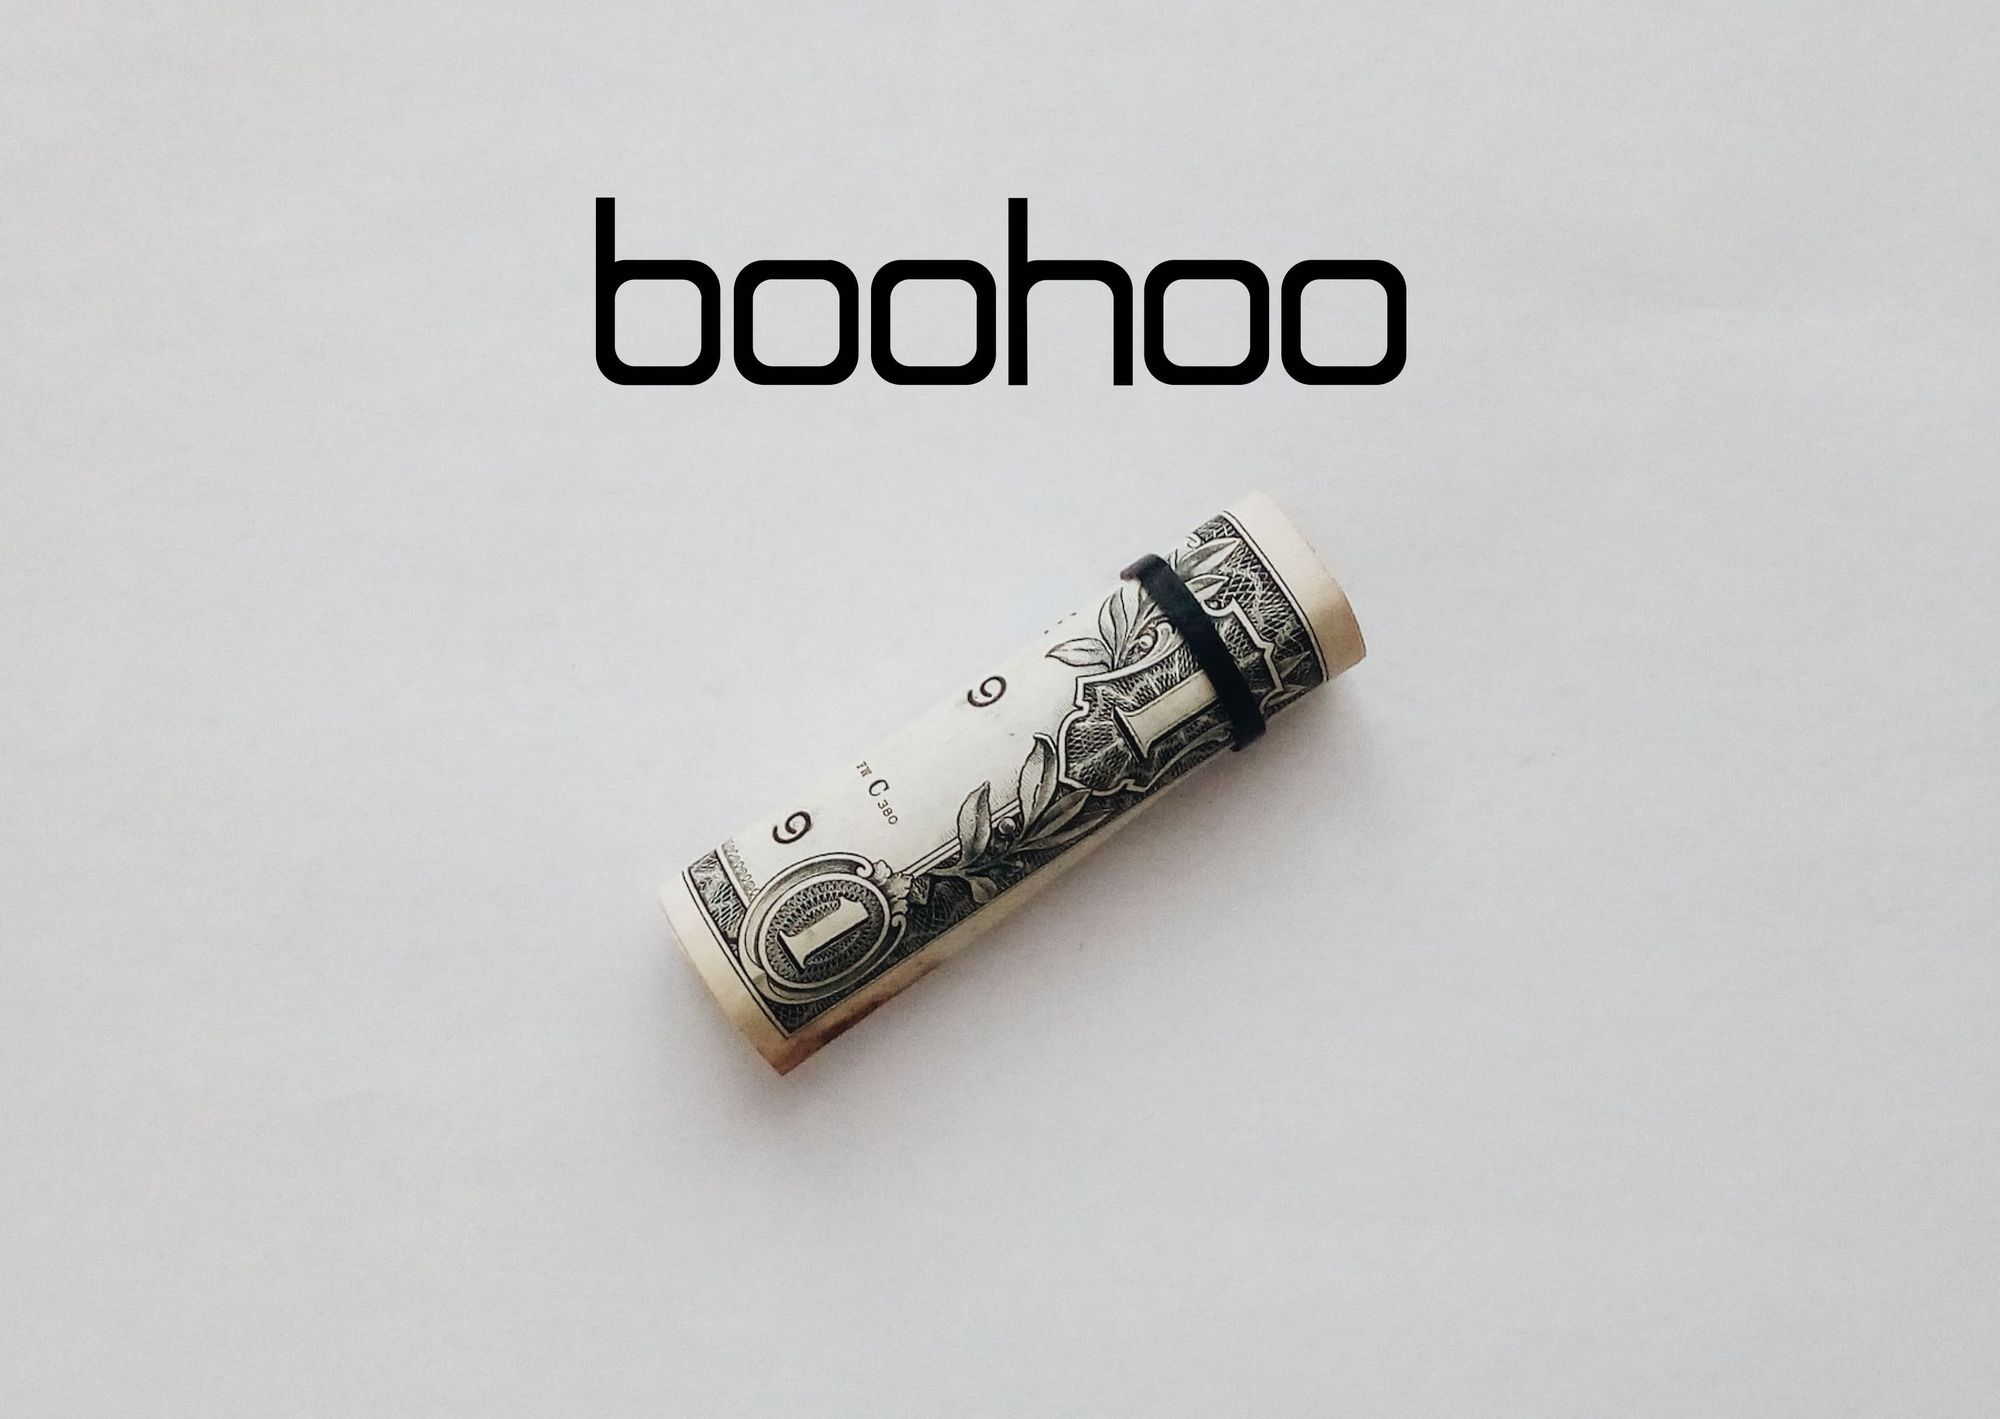 How to Get Price alerts on Boohoo